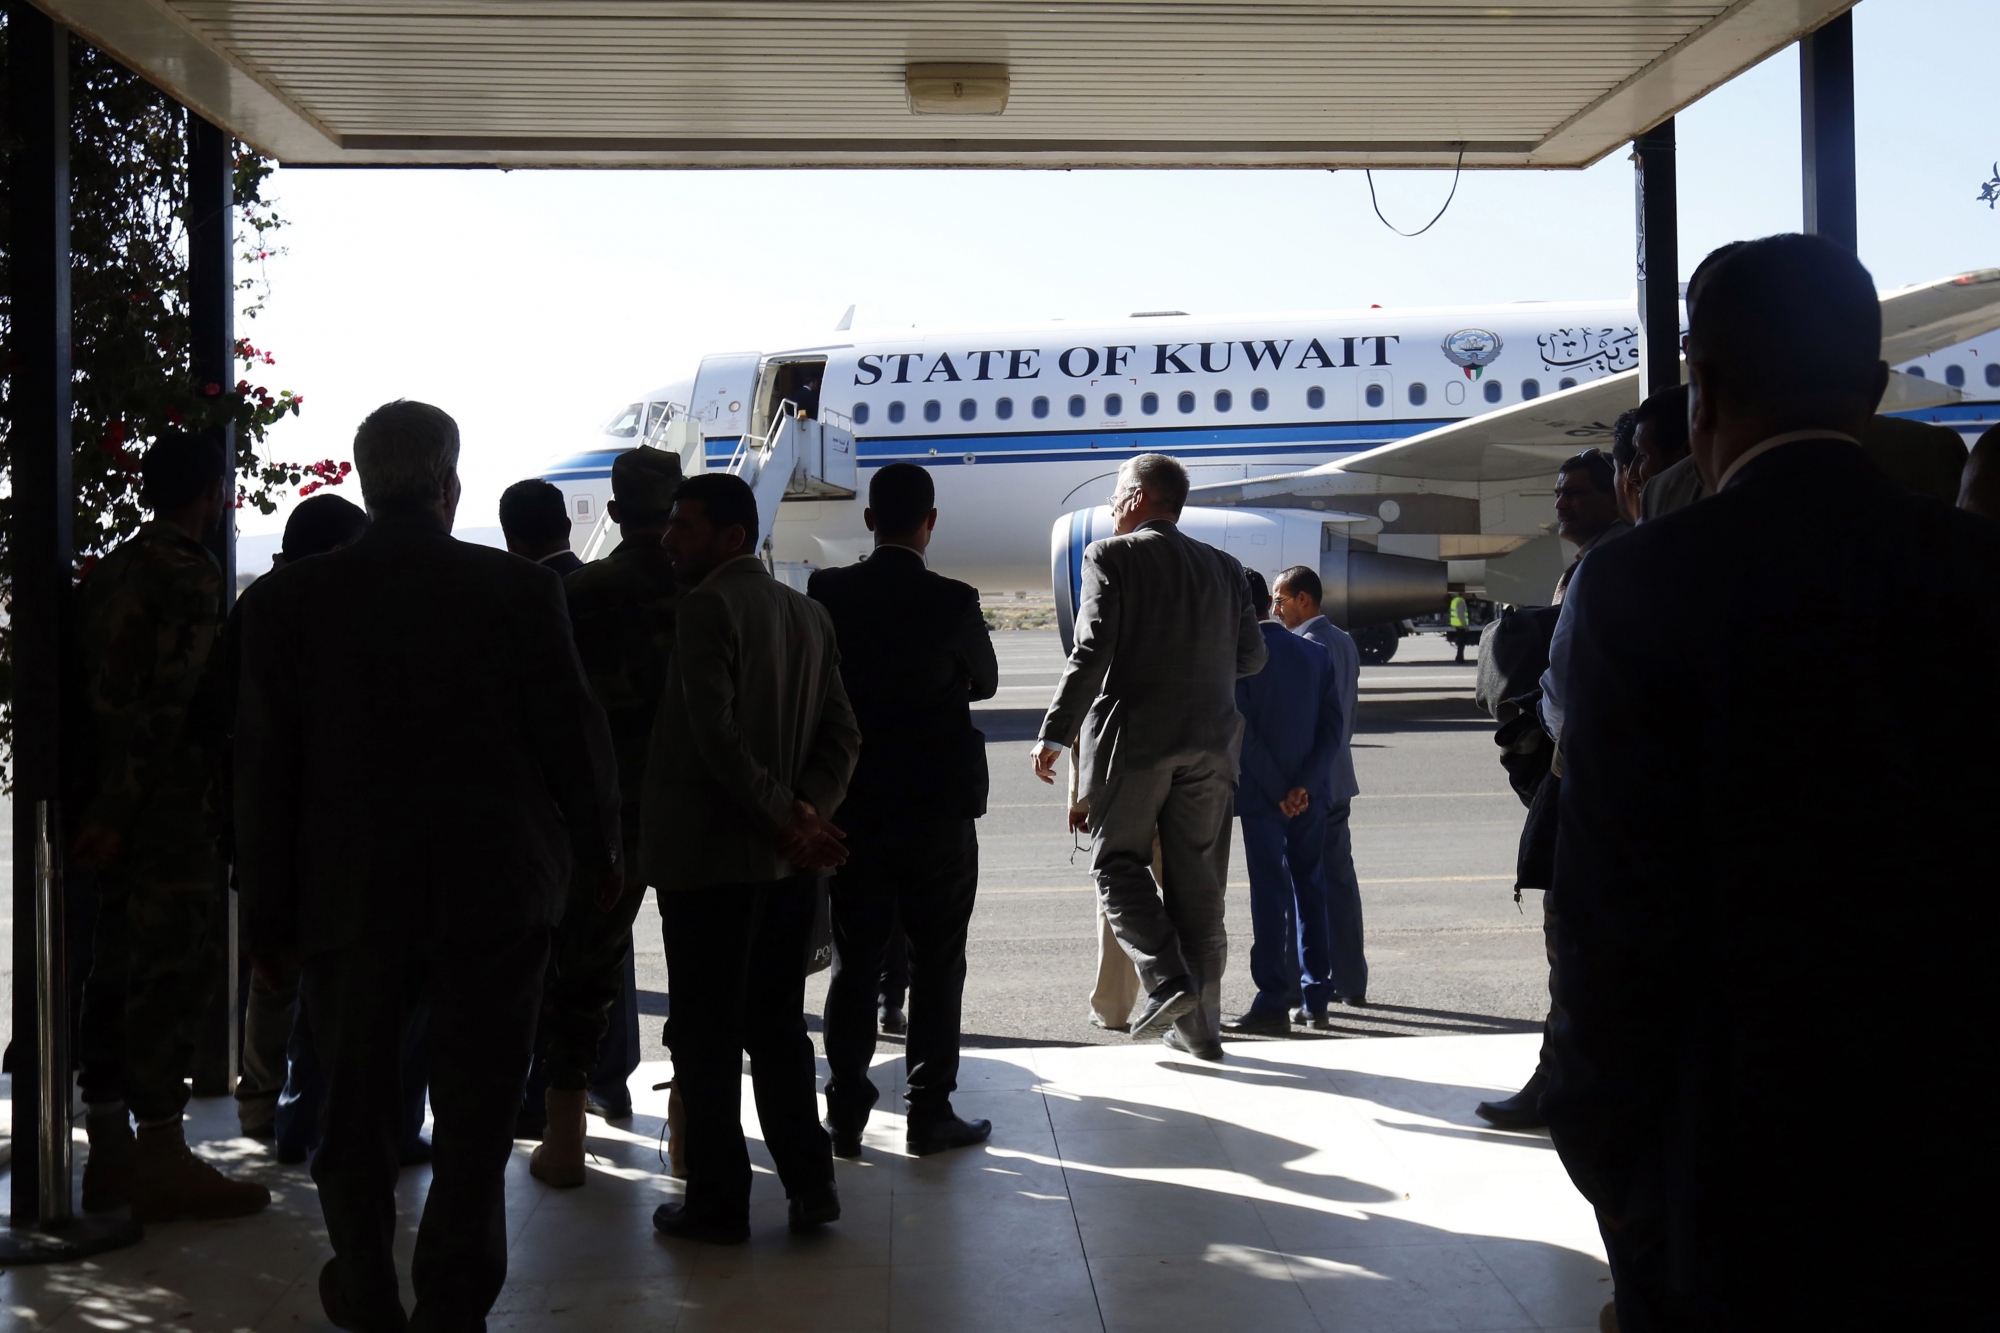 epa07208379 Members of a Houthi delegation wait for a Kuwait-chartered plane as they are accompanied by UN special envoy for Yemen Martin Griffiths and Kuwaiti ambassador to Yemen Fahd Almeie to UN-sponsored peace talks in Sweden, in SanaÄôa, Yemen, 04 December 2018. According to reports, Kuwaiti ambassador to Yemen Fahd Almeie and UN special envoy for Yemen Martin Griffiths accompanied a Houthi negotiating team to Sweden for UN-sponsored peace talks on the ongoing conflict between the Houthi rebels and the Saudi-backed Yemeni government since 2015.  EPA/YAHYA ARHAB YEMEN CONFLICT HOUTHIS PEACE TALKS